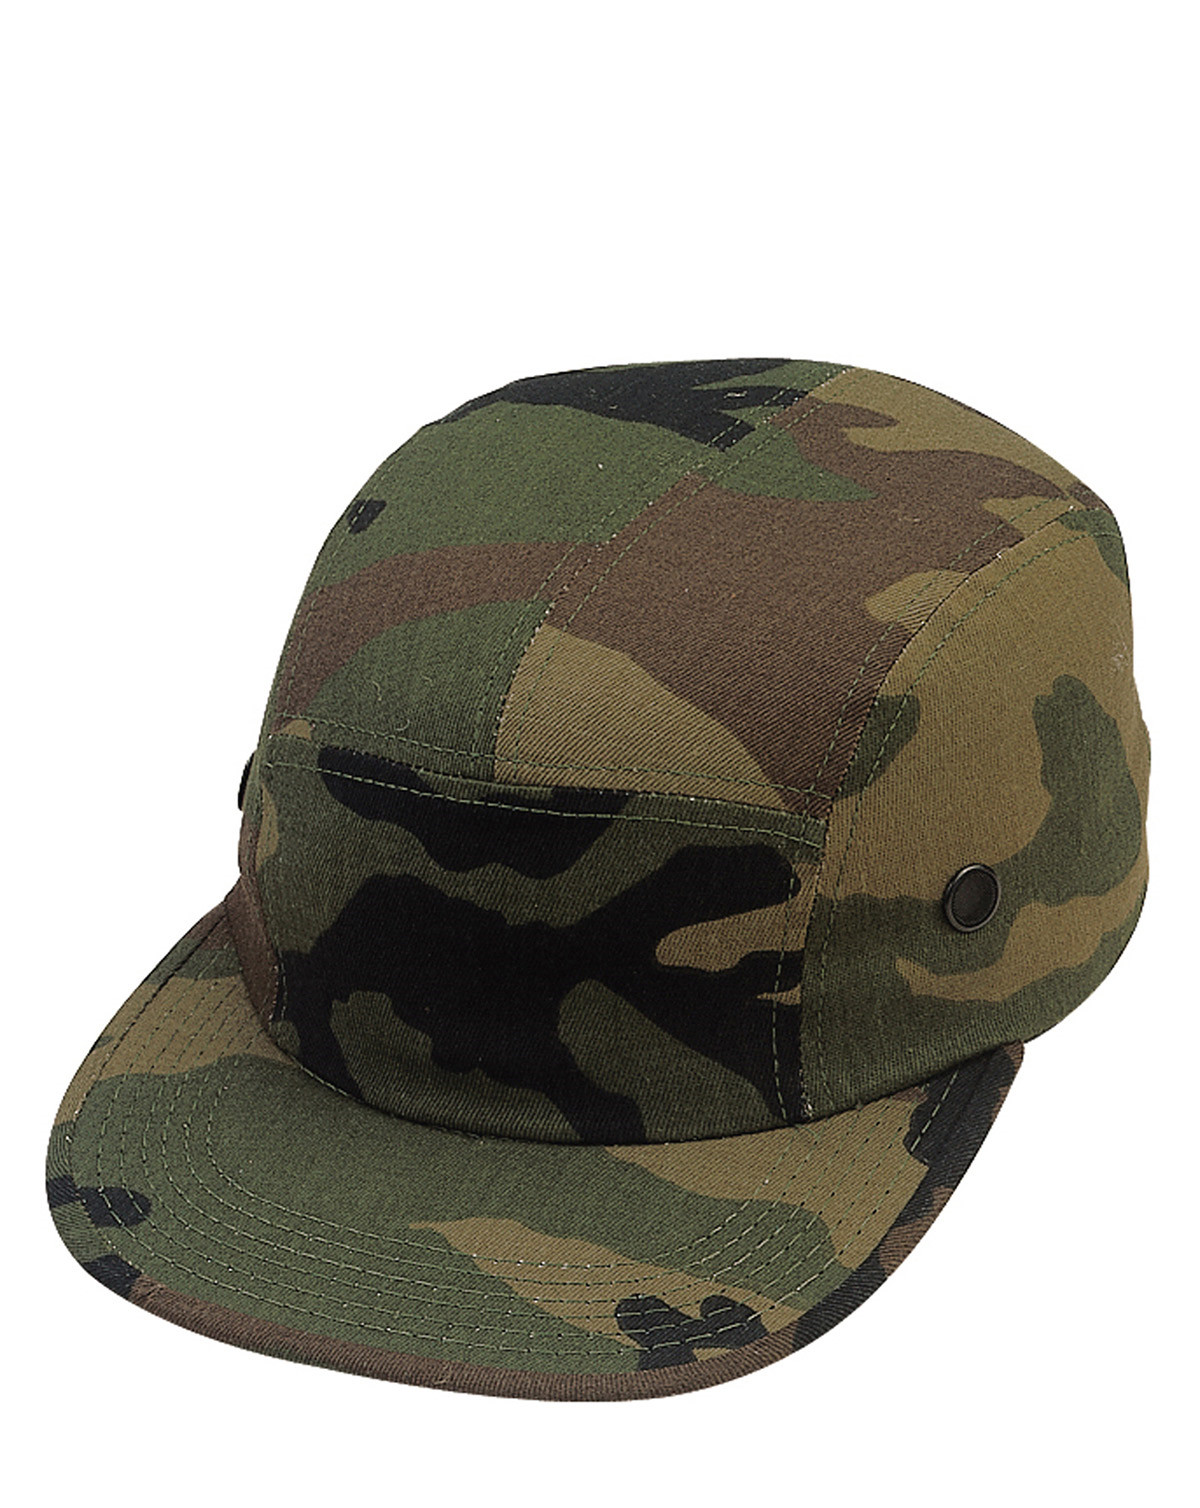 #3 - Rothco 5 Panel Military Street Cap (Woodland, One Size)